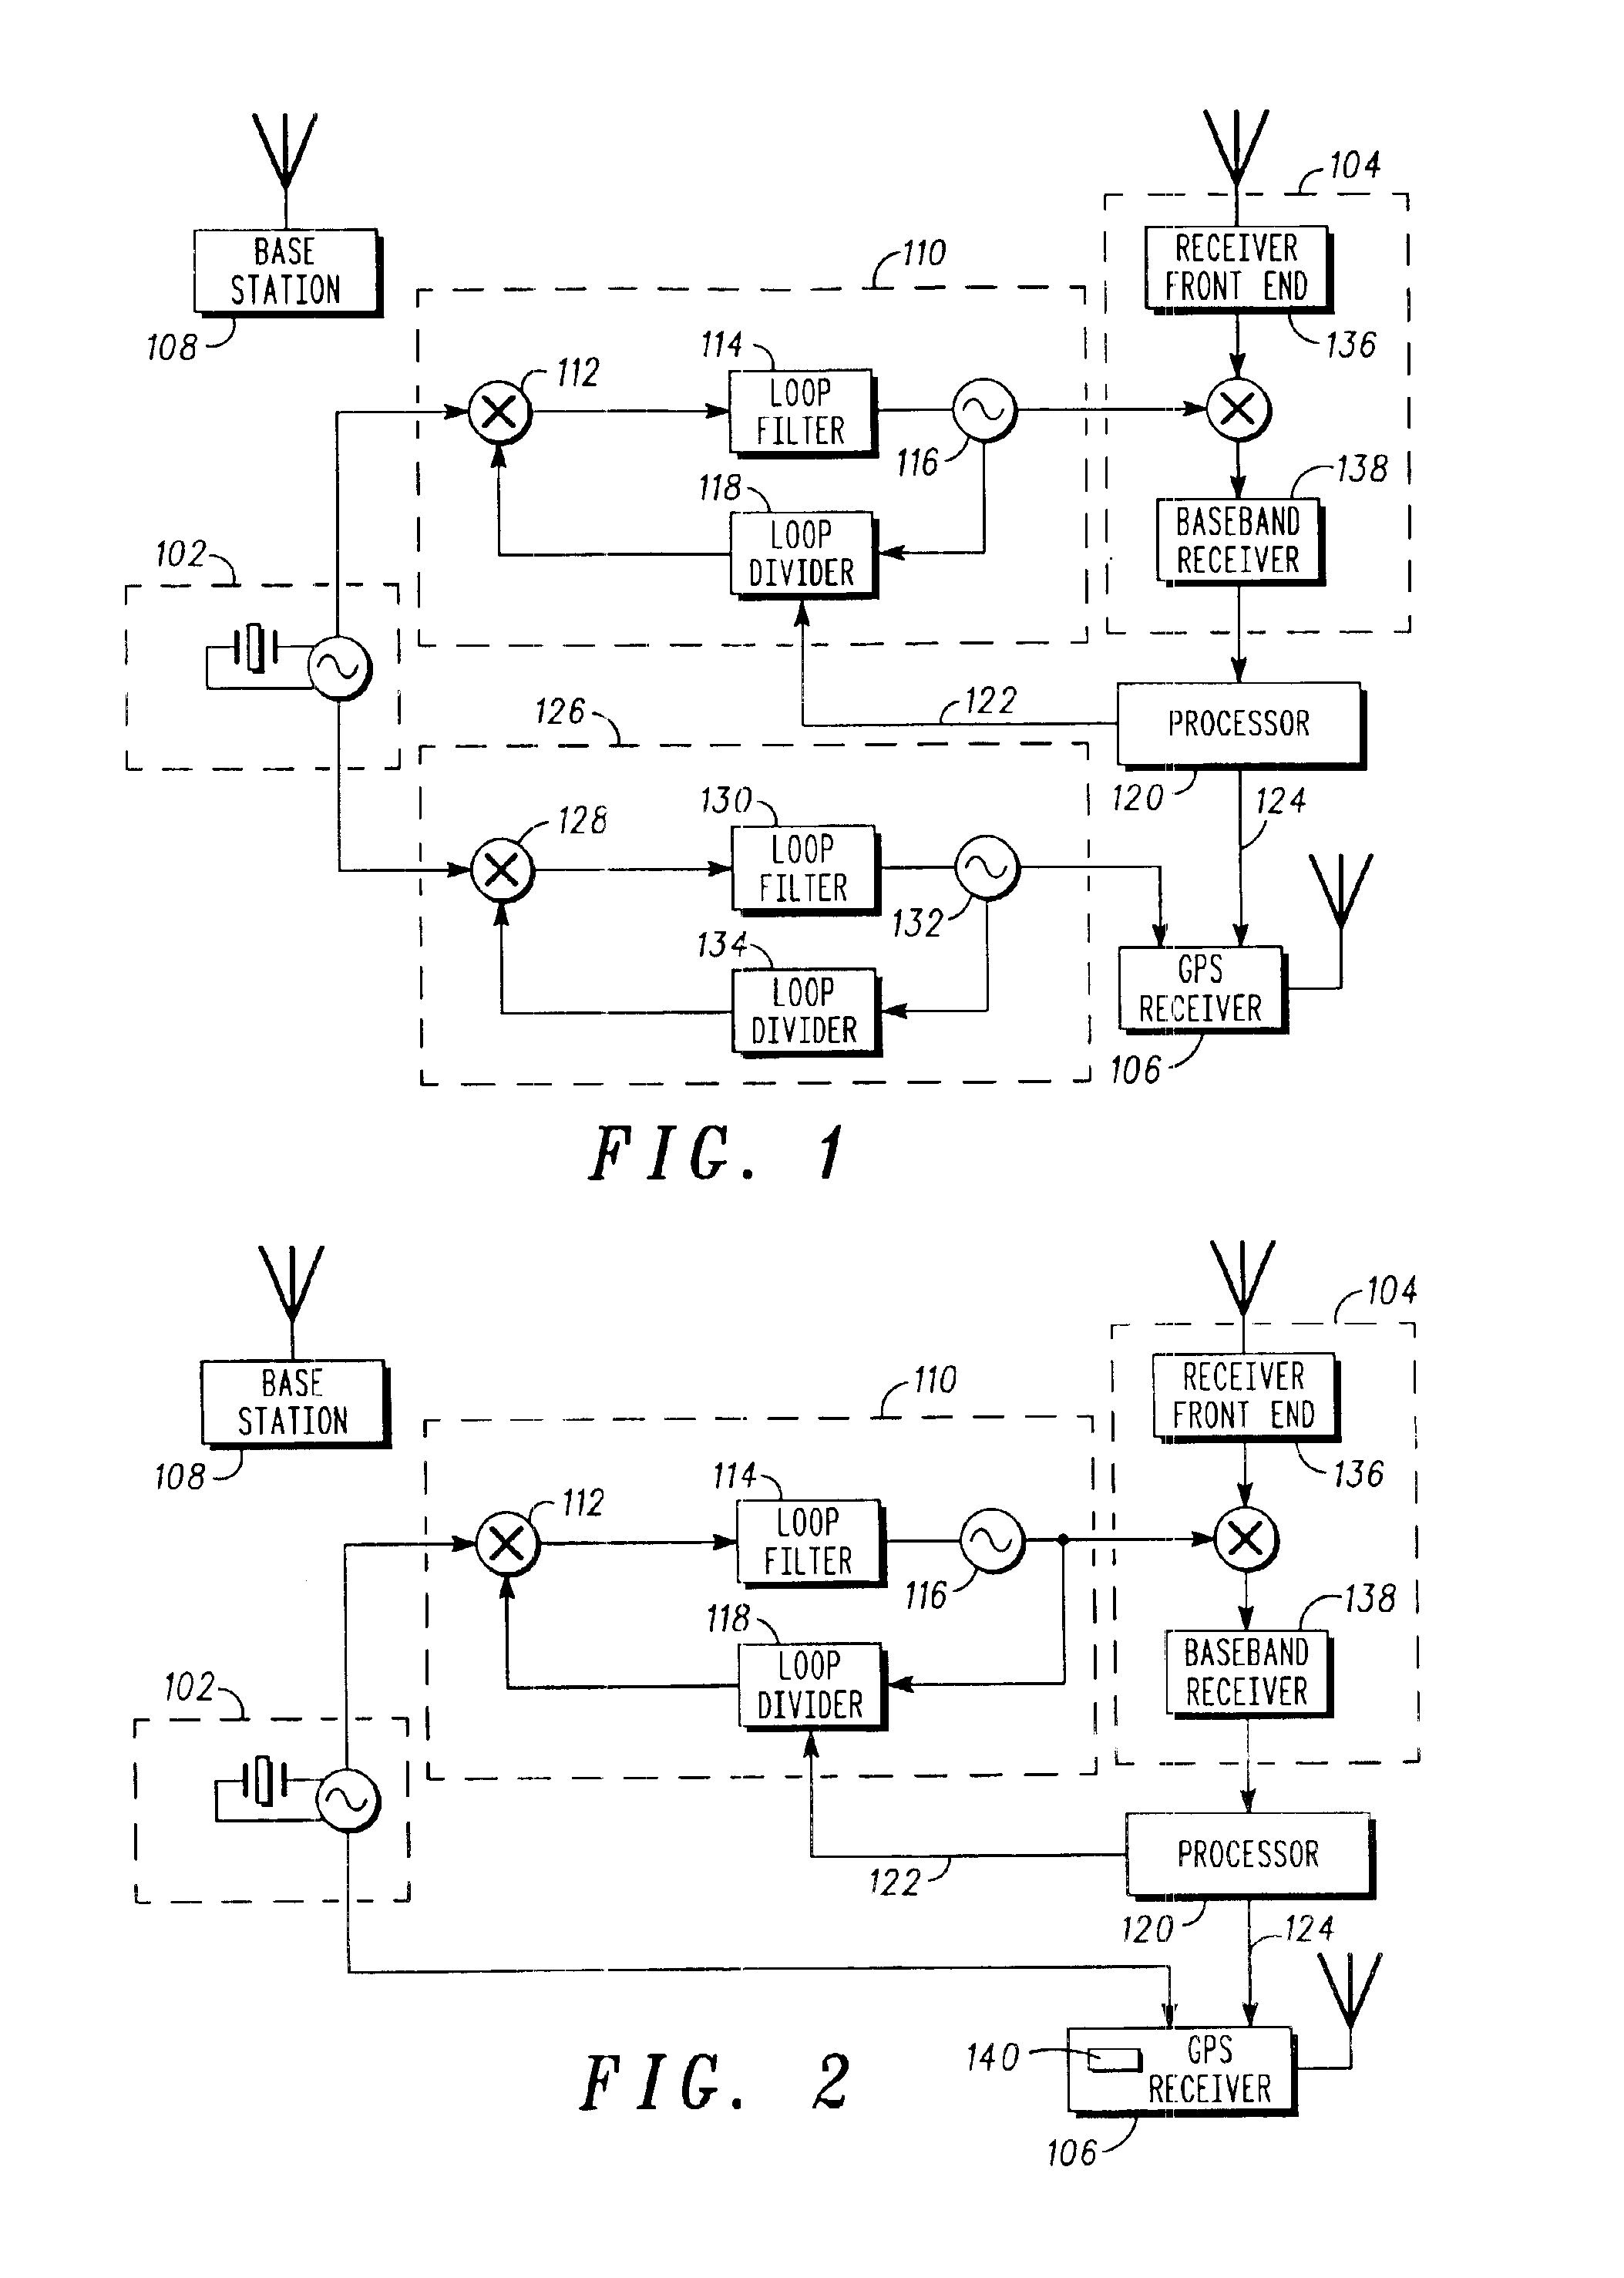 System and method for frequency management in a communications positioning device